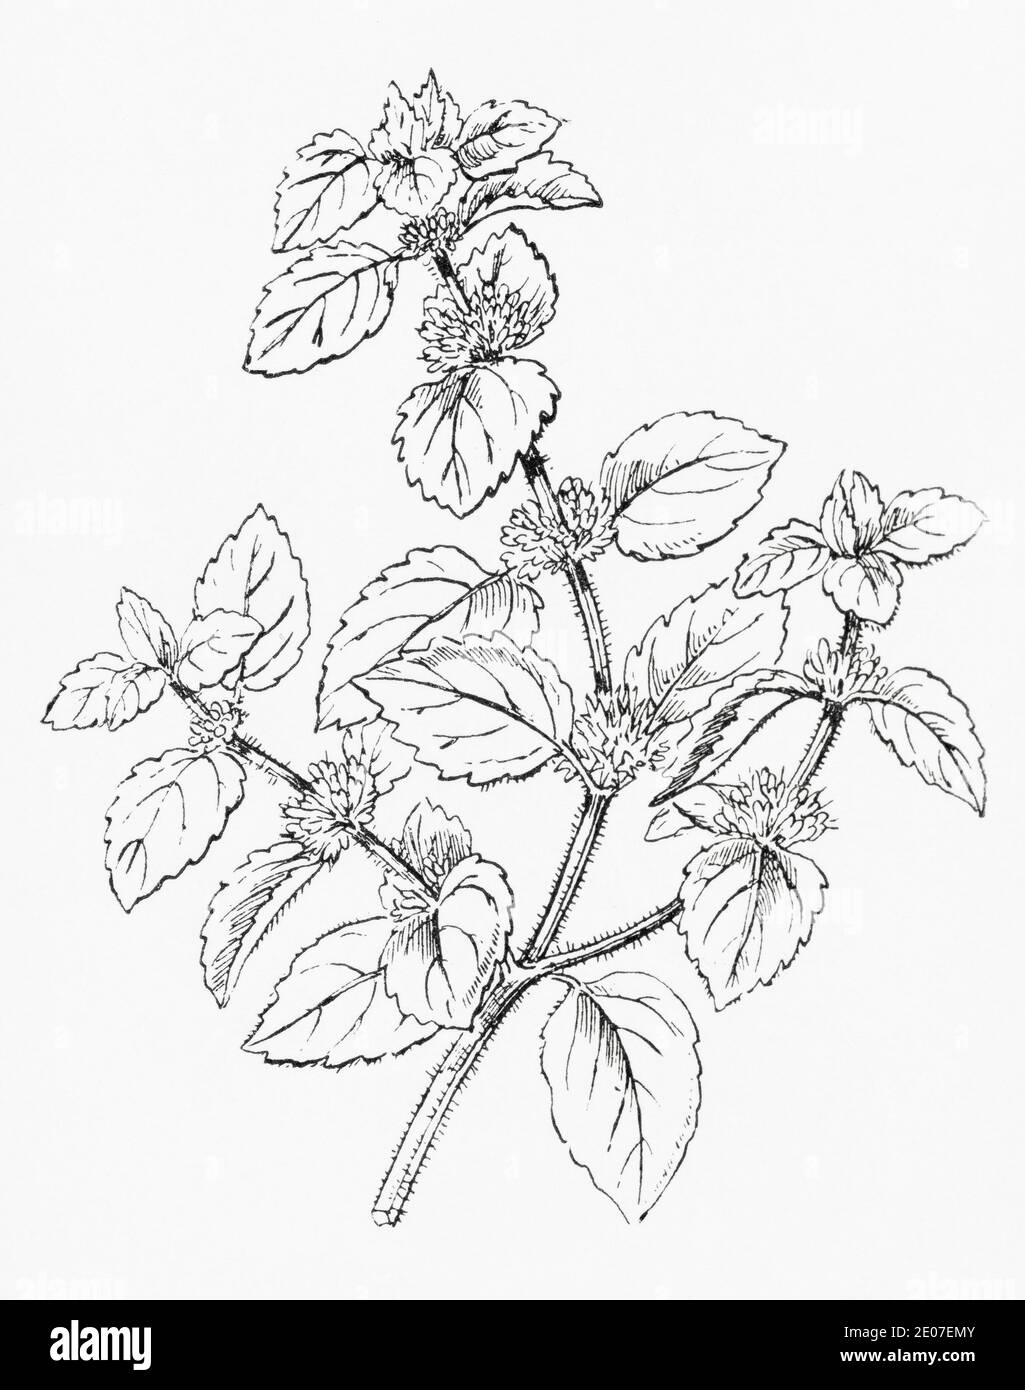 Old botanical illustration engraving of Corn Mint / Mentha arvensis. Traditional medicinal herbal plant. See Notes Stock Photo